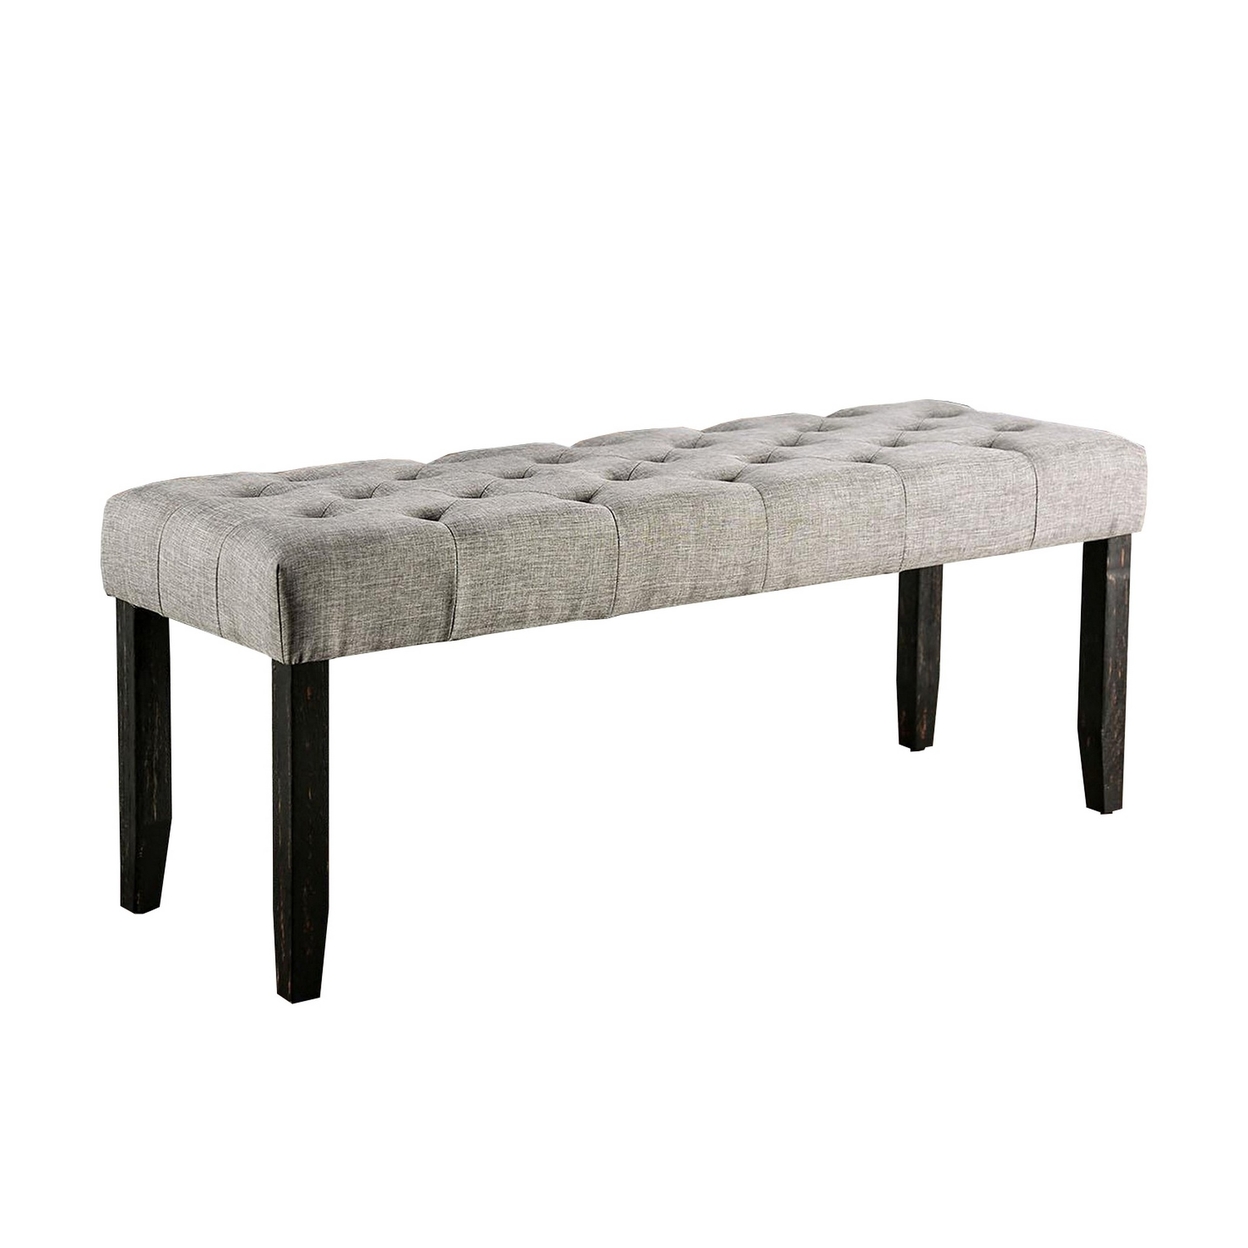 48 Inches Bench With Tufted Seat And Chamfered Legs, Light Gray- Saltoro Sherpi